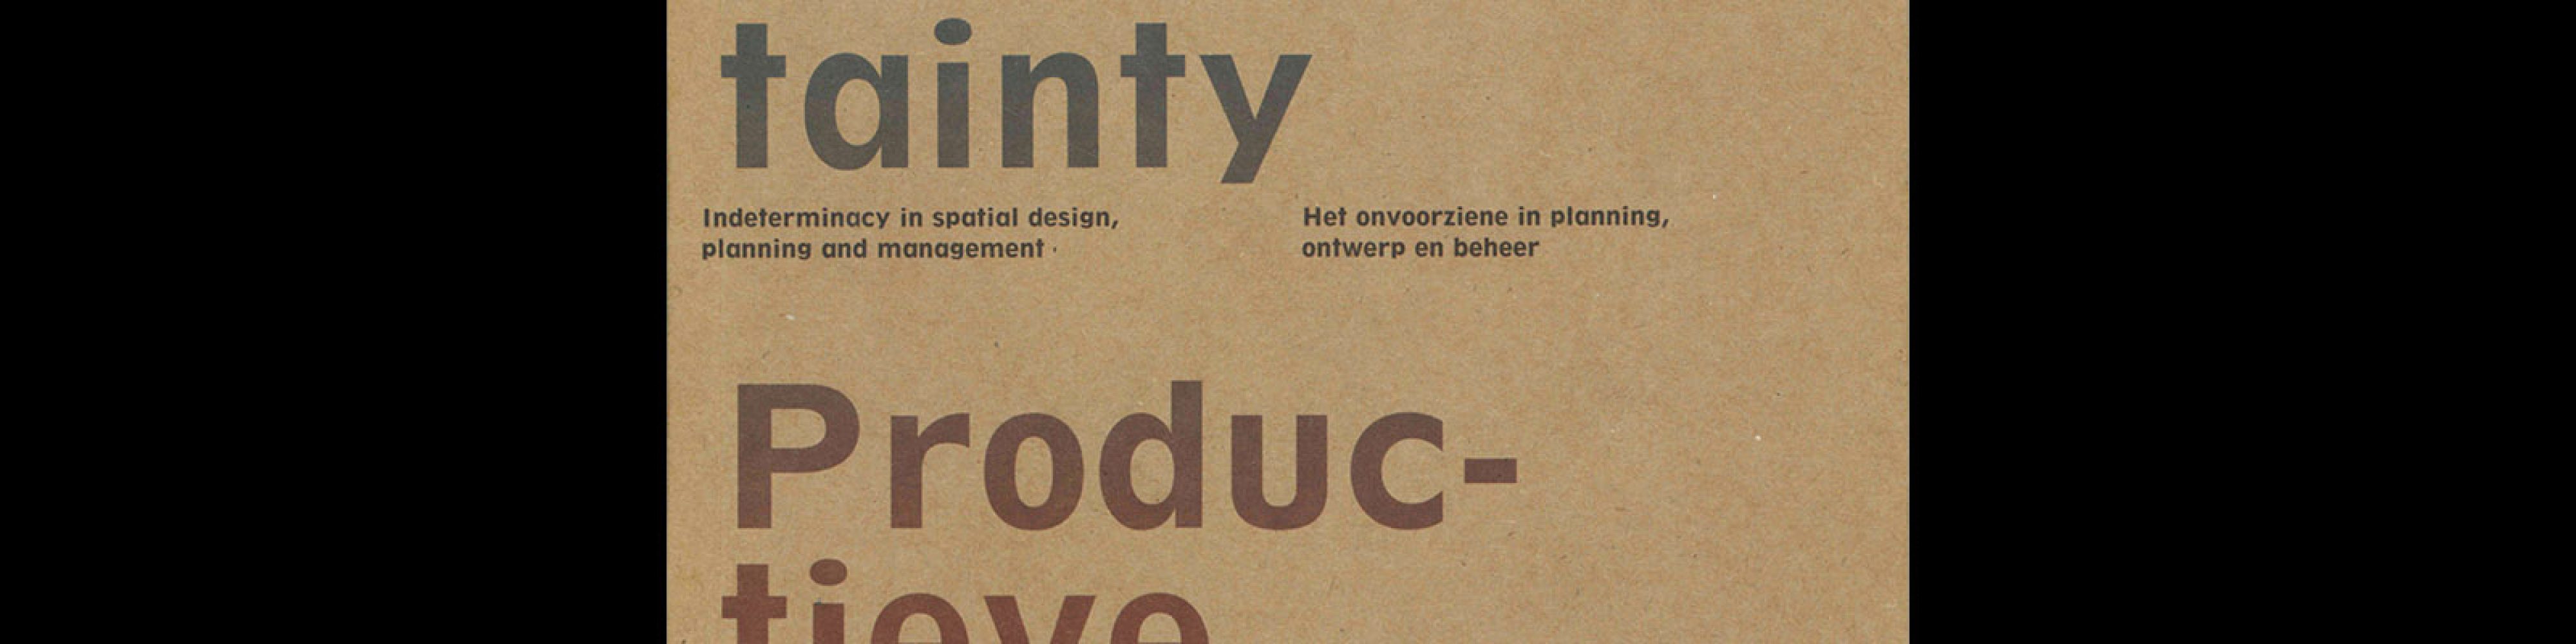 OASE 85, 2011, Productive Uncertainty. Designed by Aagje Martens and Karel Martens